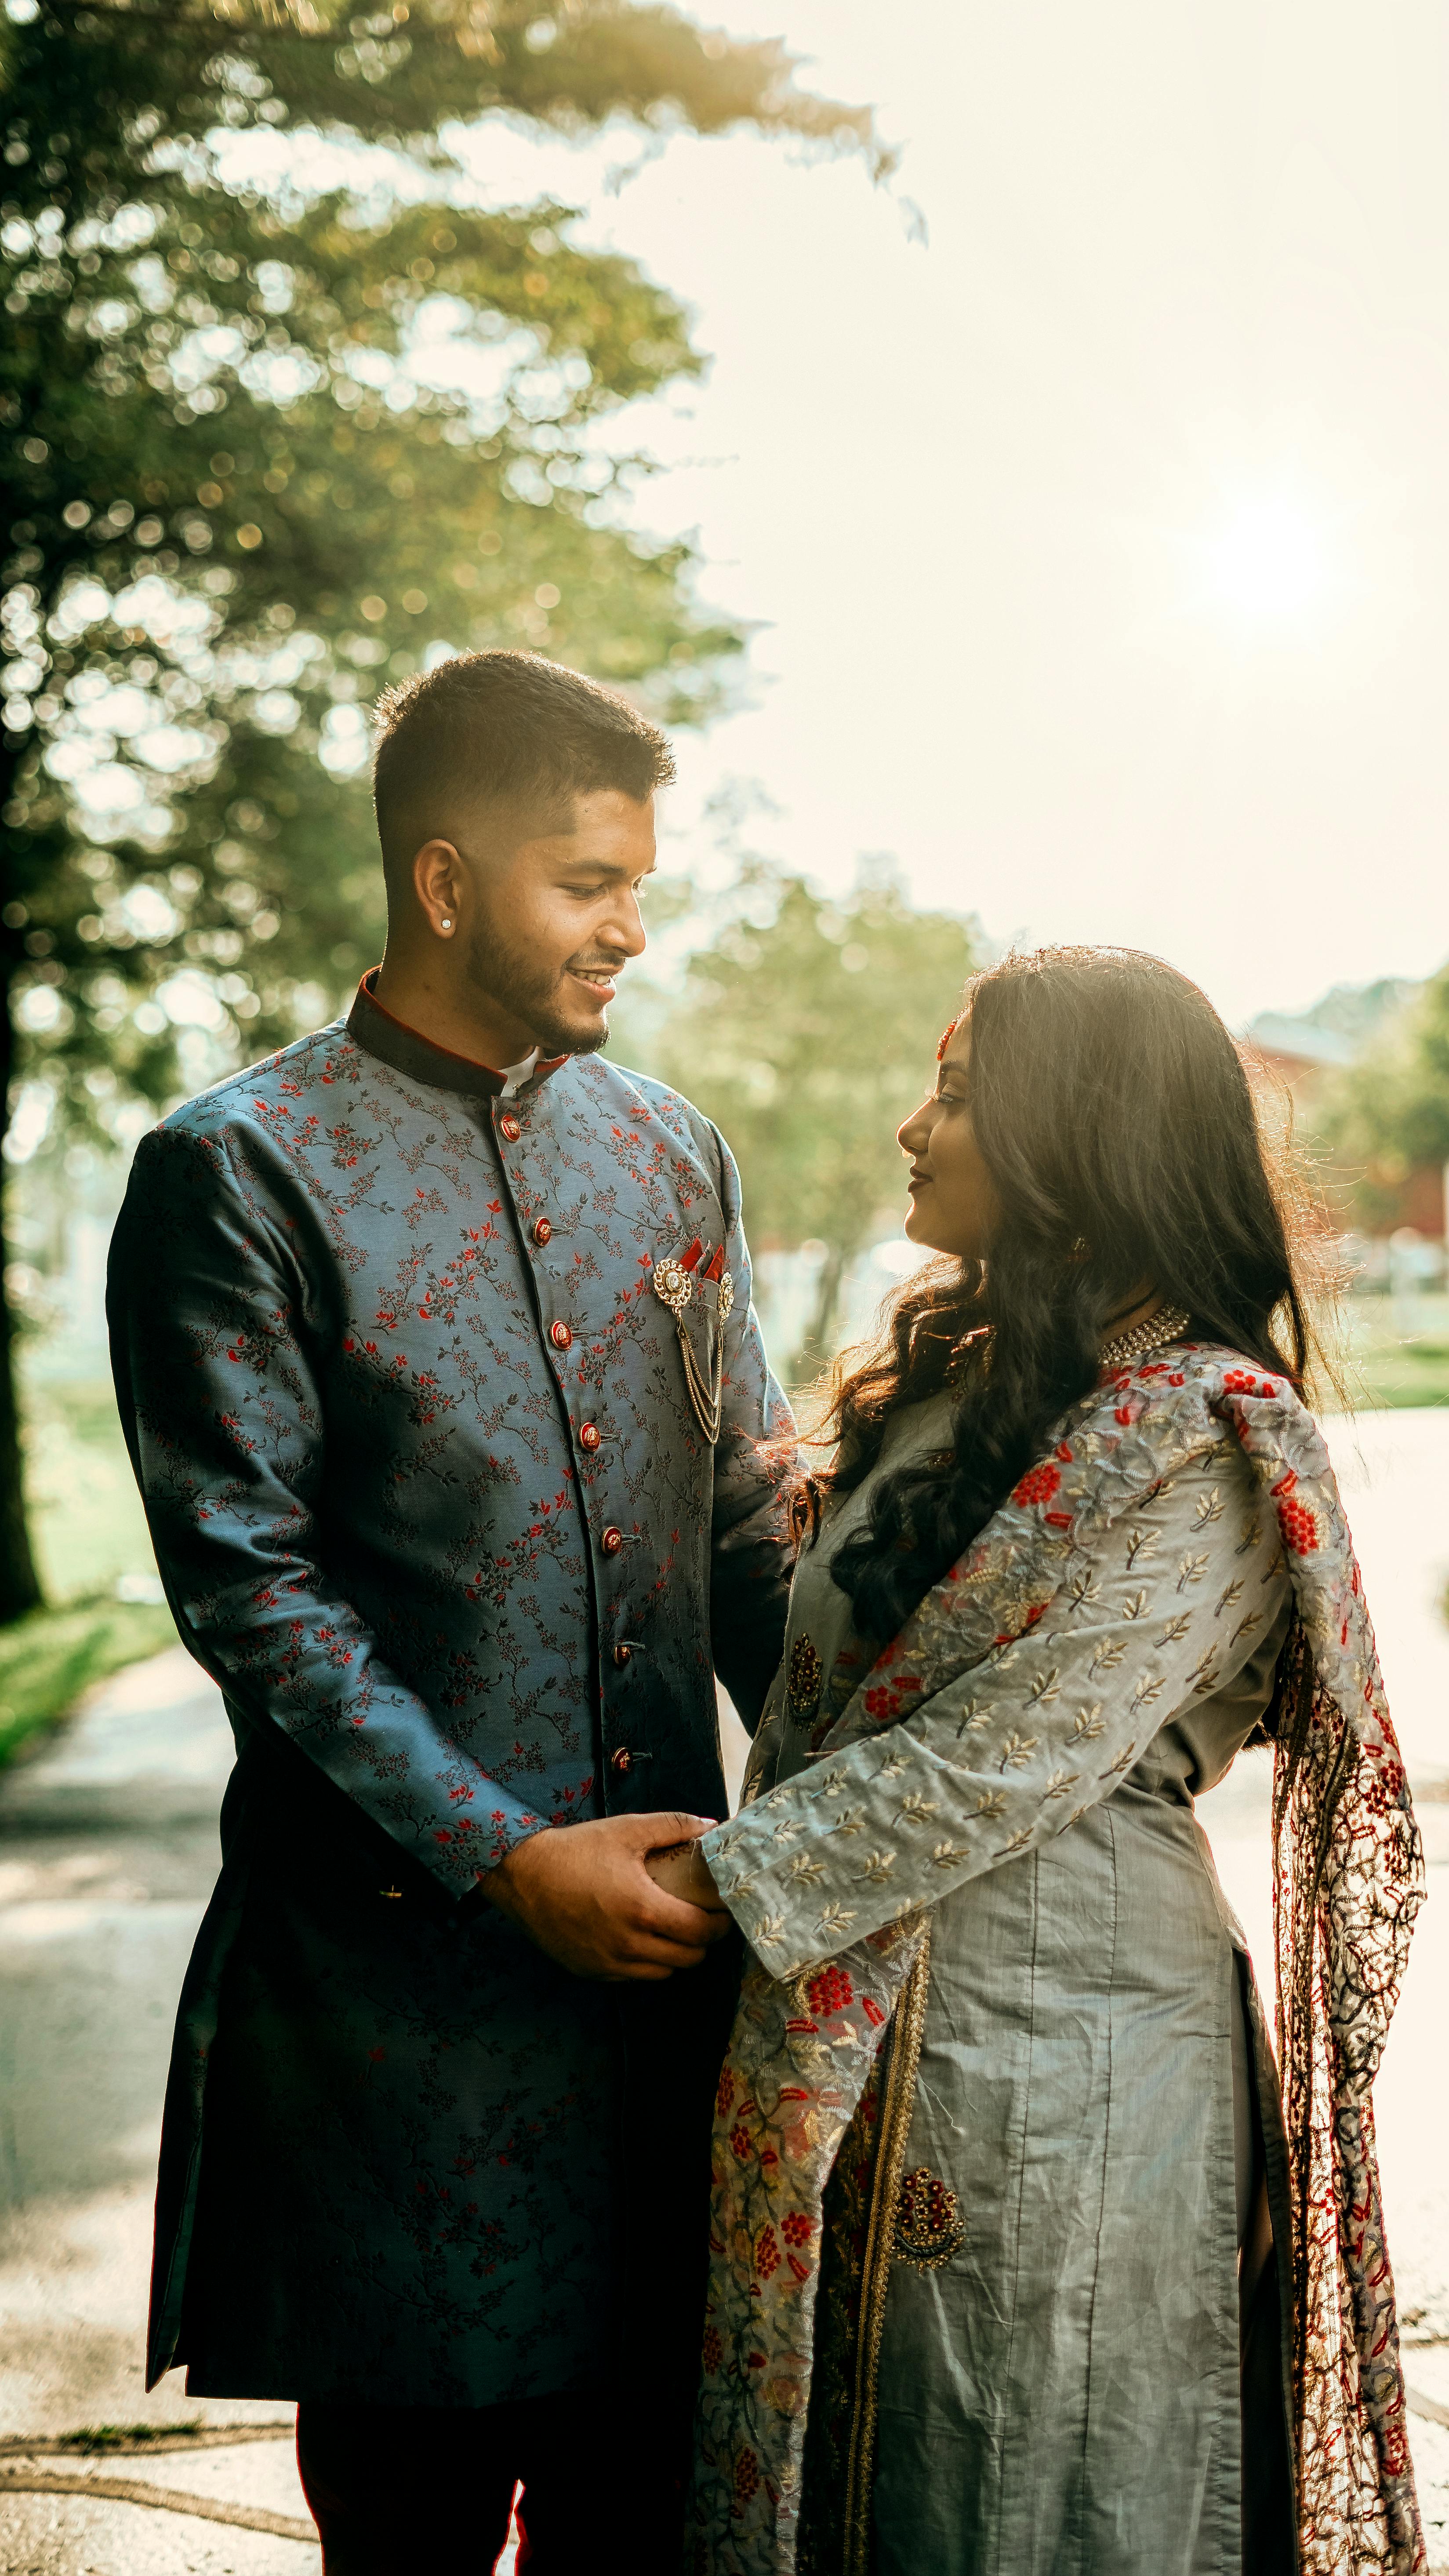 Find venues for Indian weddings, request quotes, personalized  consultations. | Indian wedding photography poses, Wedding photoshoot poses,  Indian wedding poses